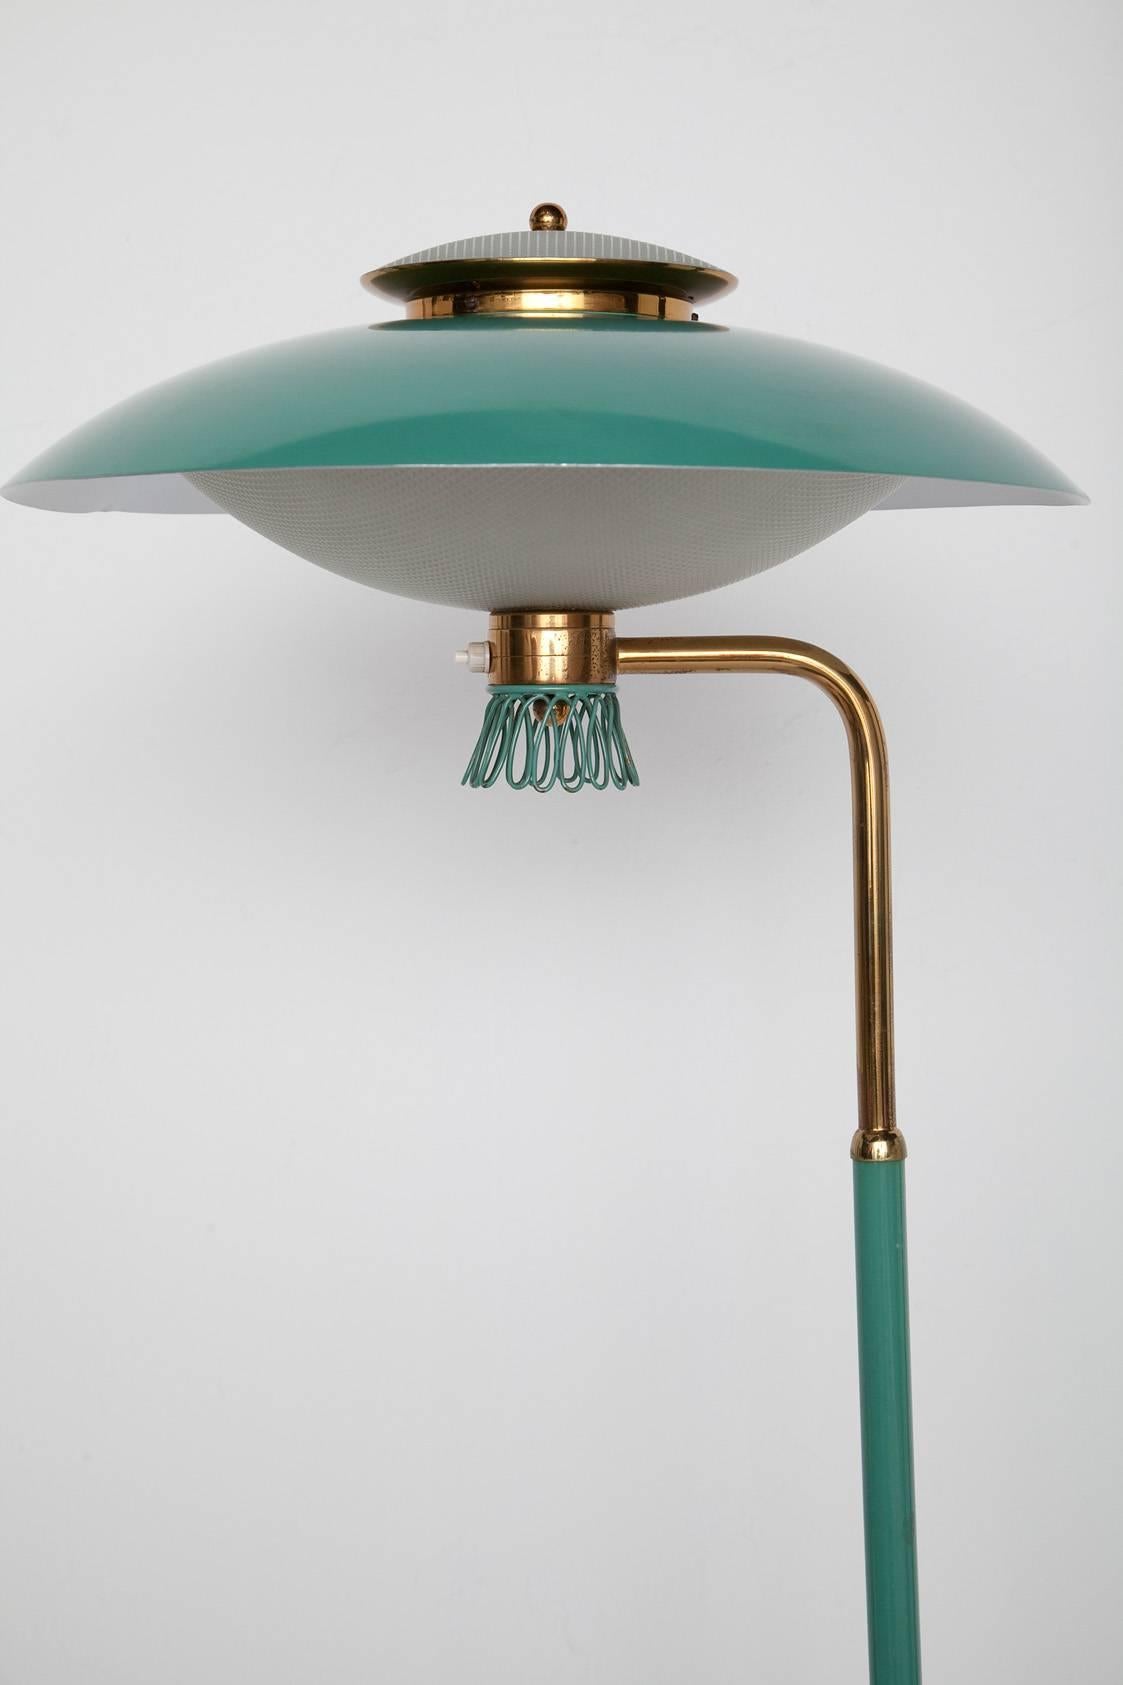 1950s Italian floor lamp in original swoon worthy green enameled metal with original waffled glass diffusers, solid brass hardware and an incredible green glass base, 1.25 inches thick. This lamp charms even down to the white scalloped light sockets!